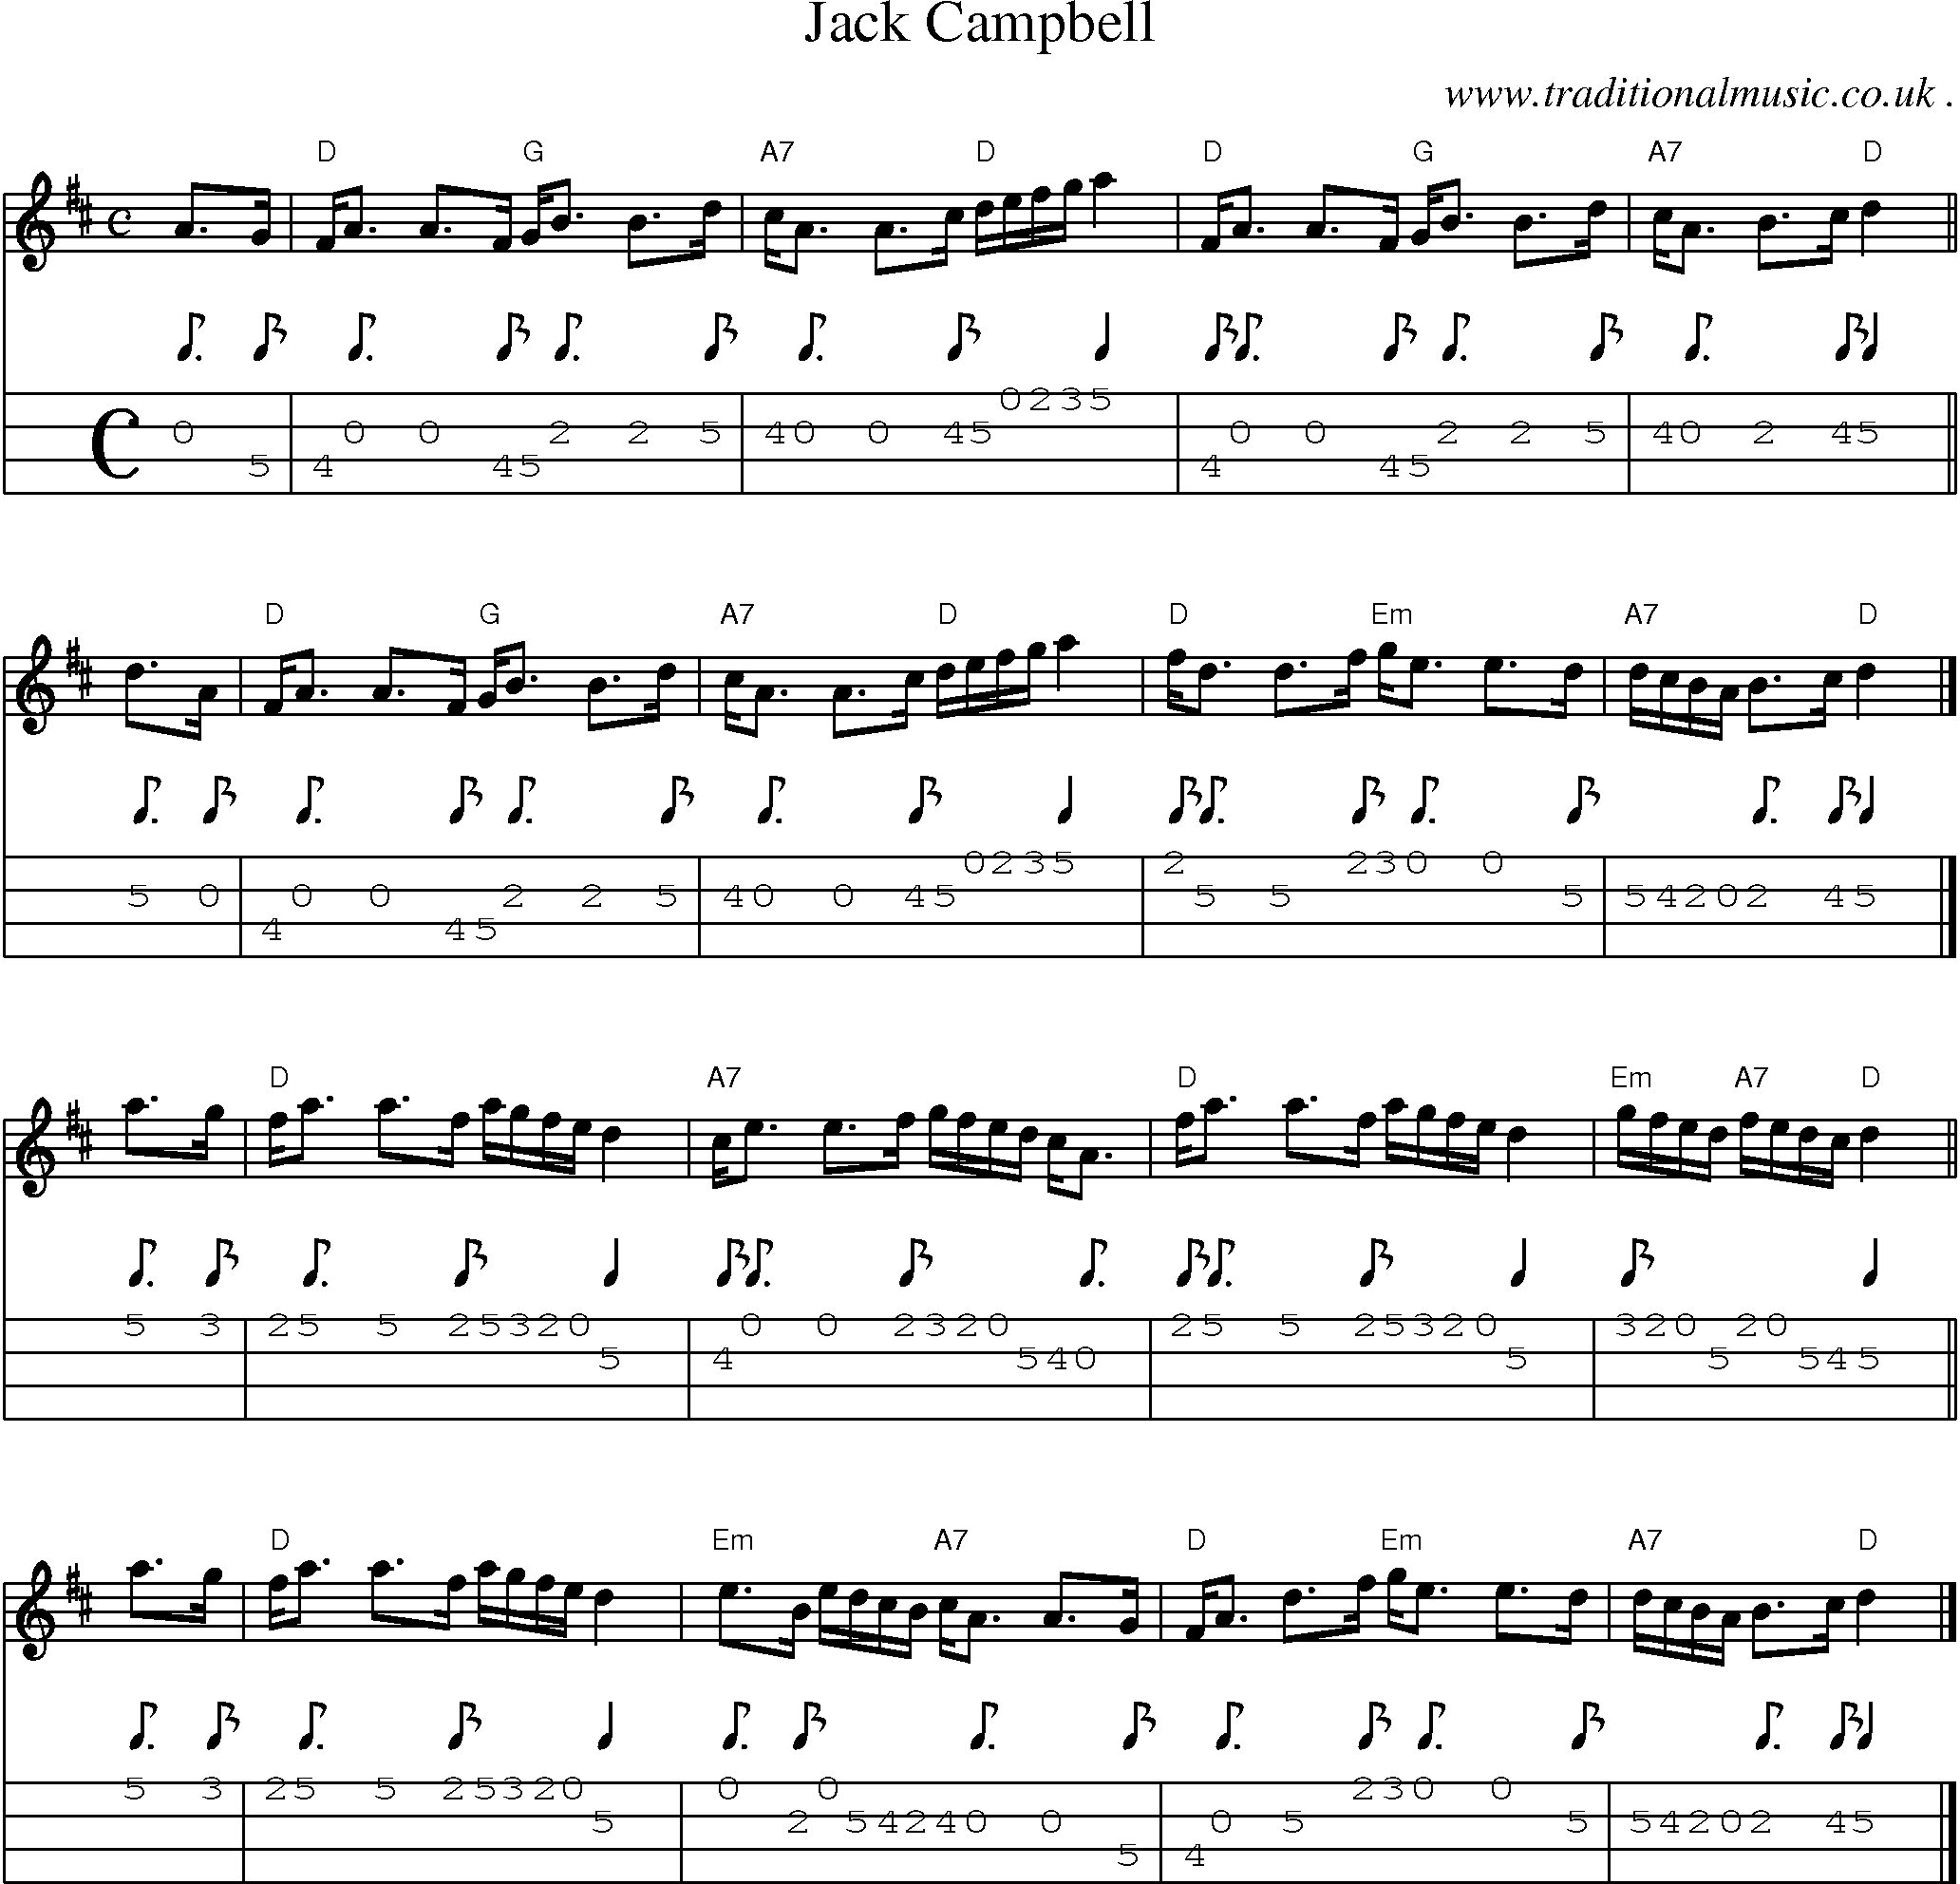 Sheet-music  score, Chords and Mandolin Tabs for Jack Campbell